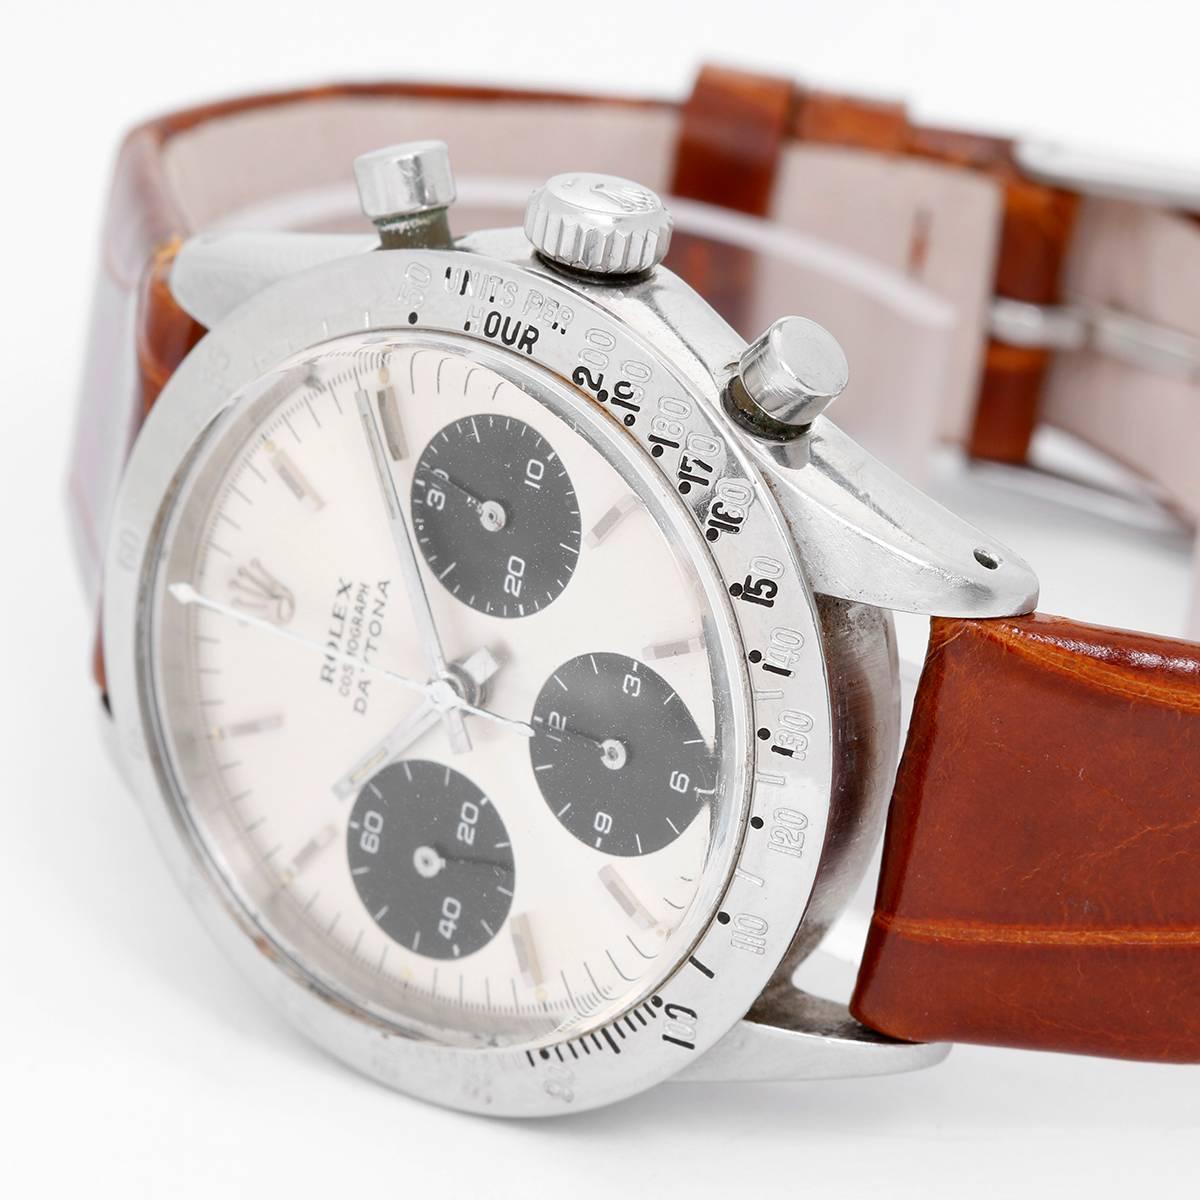 Rolex Stainless Steel Daytona Ref 6262 Men's Watch -  Automatic. Stainless Steel ( 36.5 mm ). White dial with black registered dials. Brown croc strap with buckle. Pre-owned with box. One of rarest vintage Rolex watches ever made. Only produced in